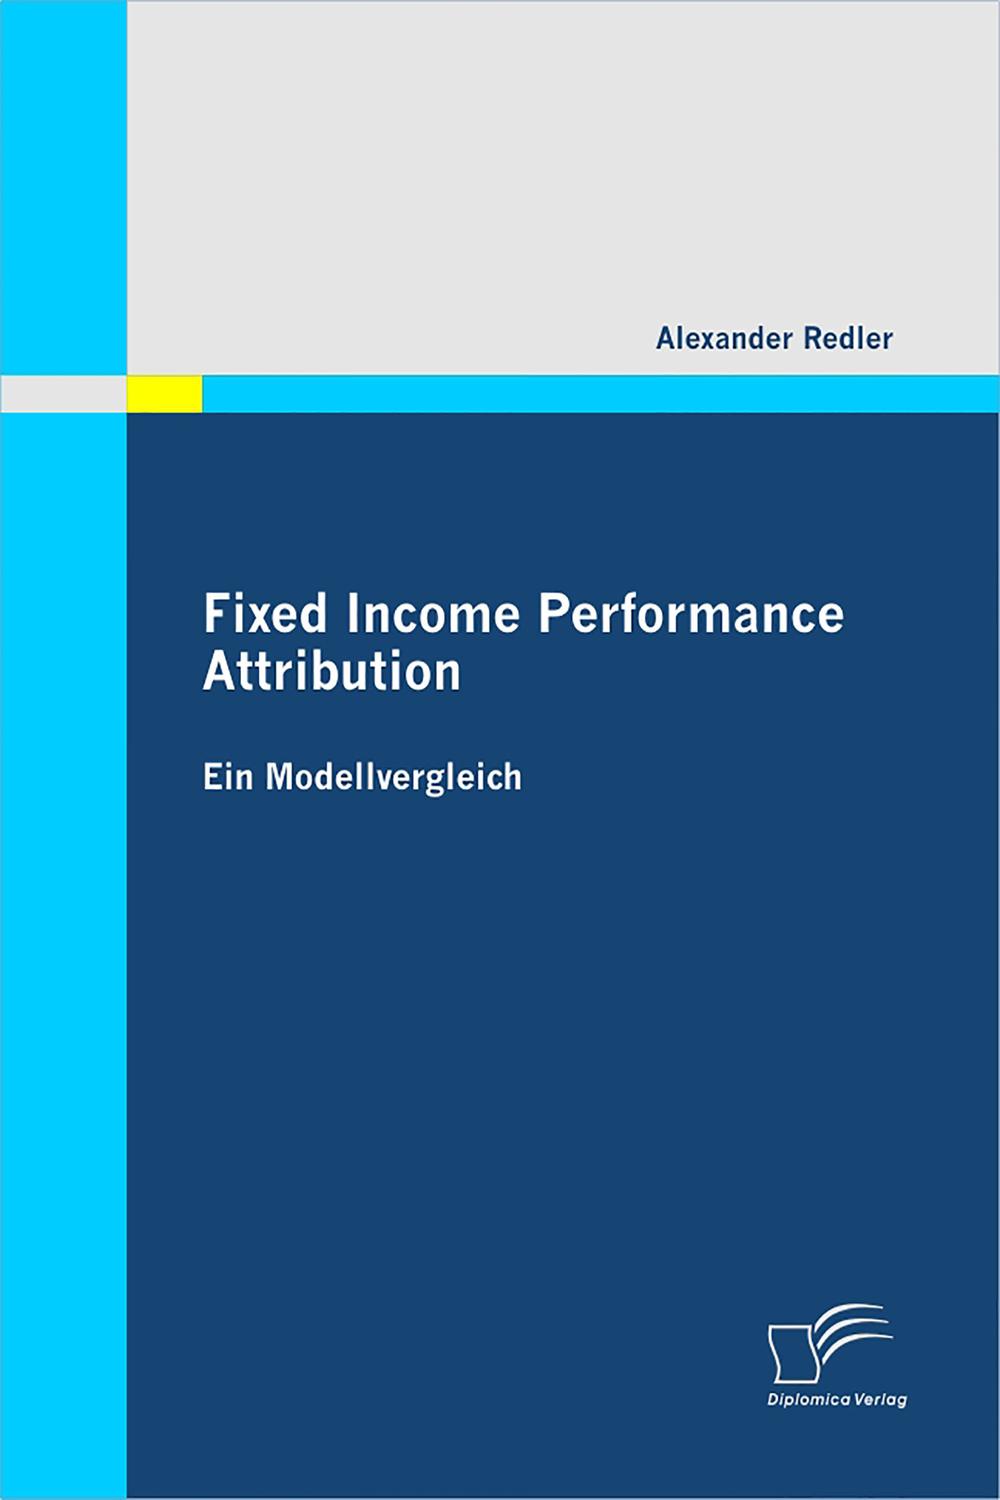 Fixed Income Performance Attribution - Alexander Redler